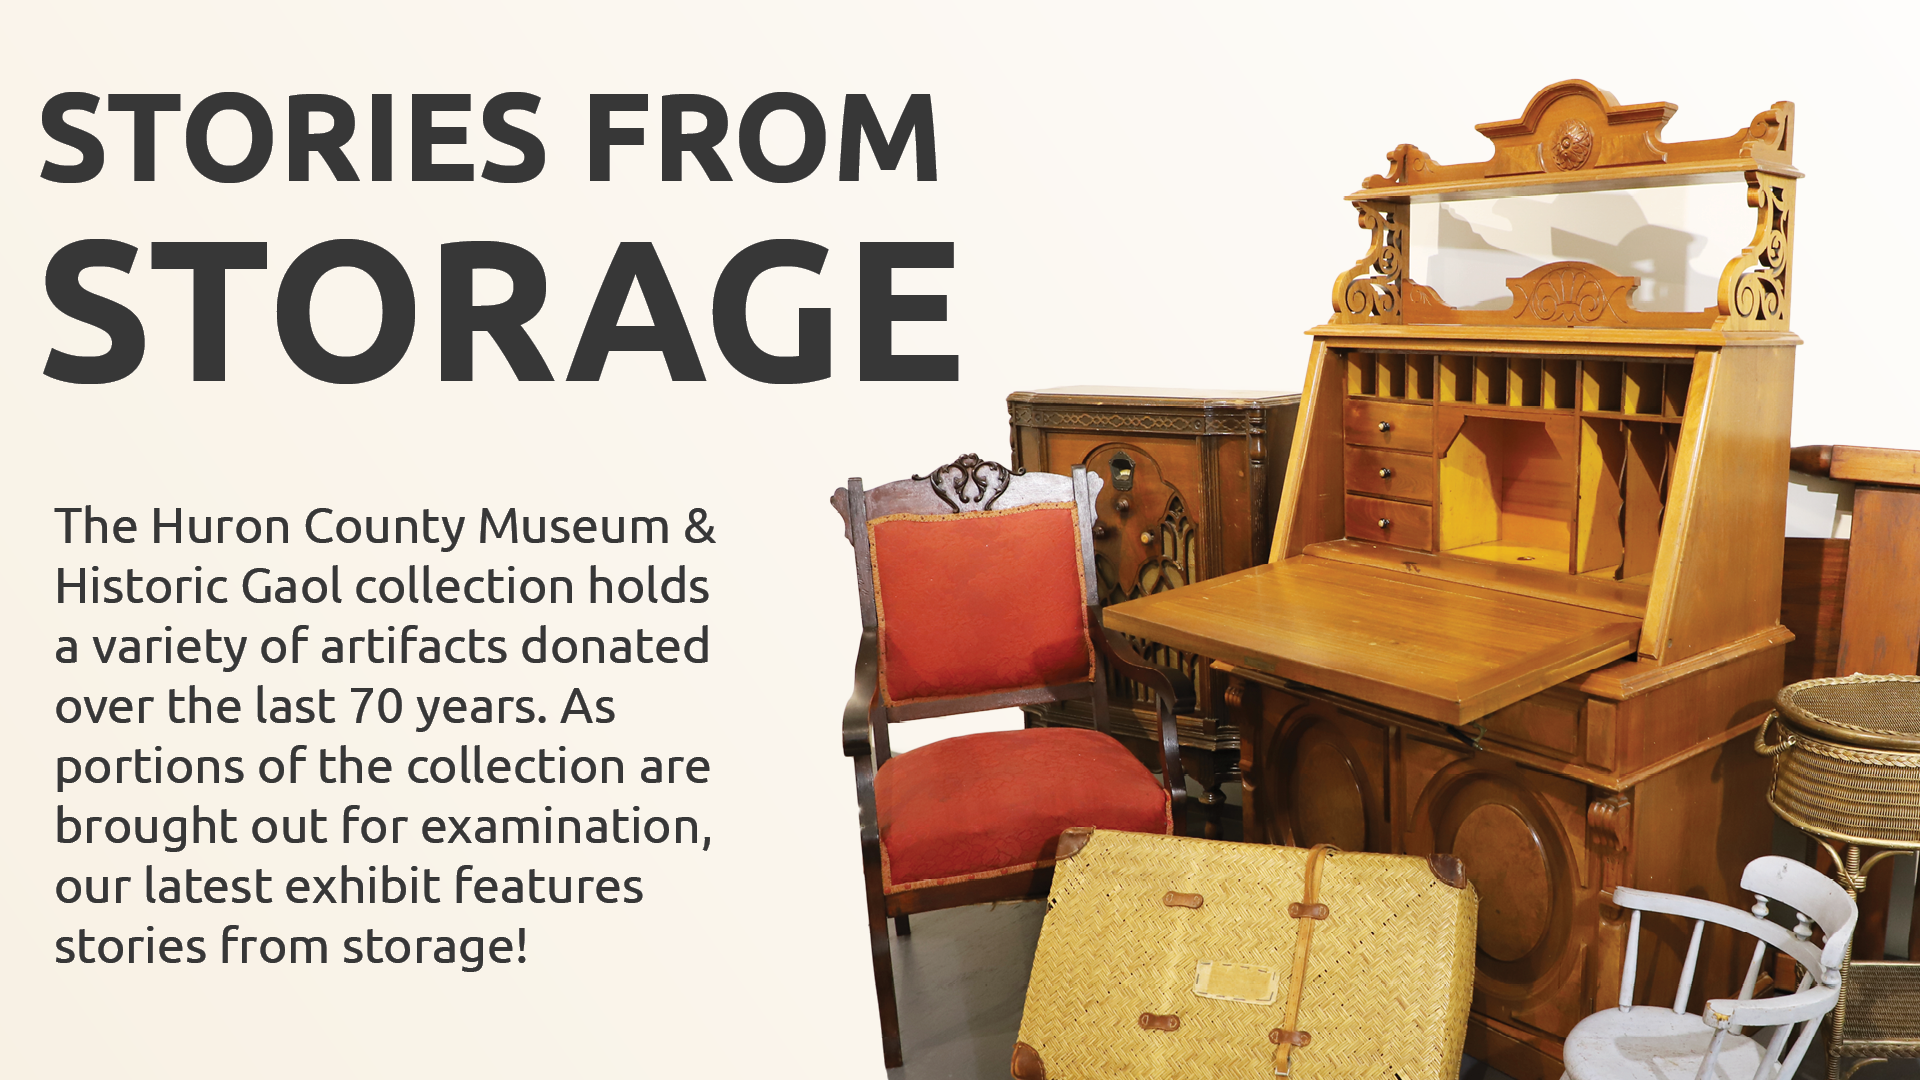 Images of artifacts from the Museum collection with text promoting Stories From Storage exhibit